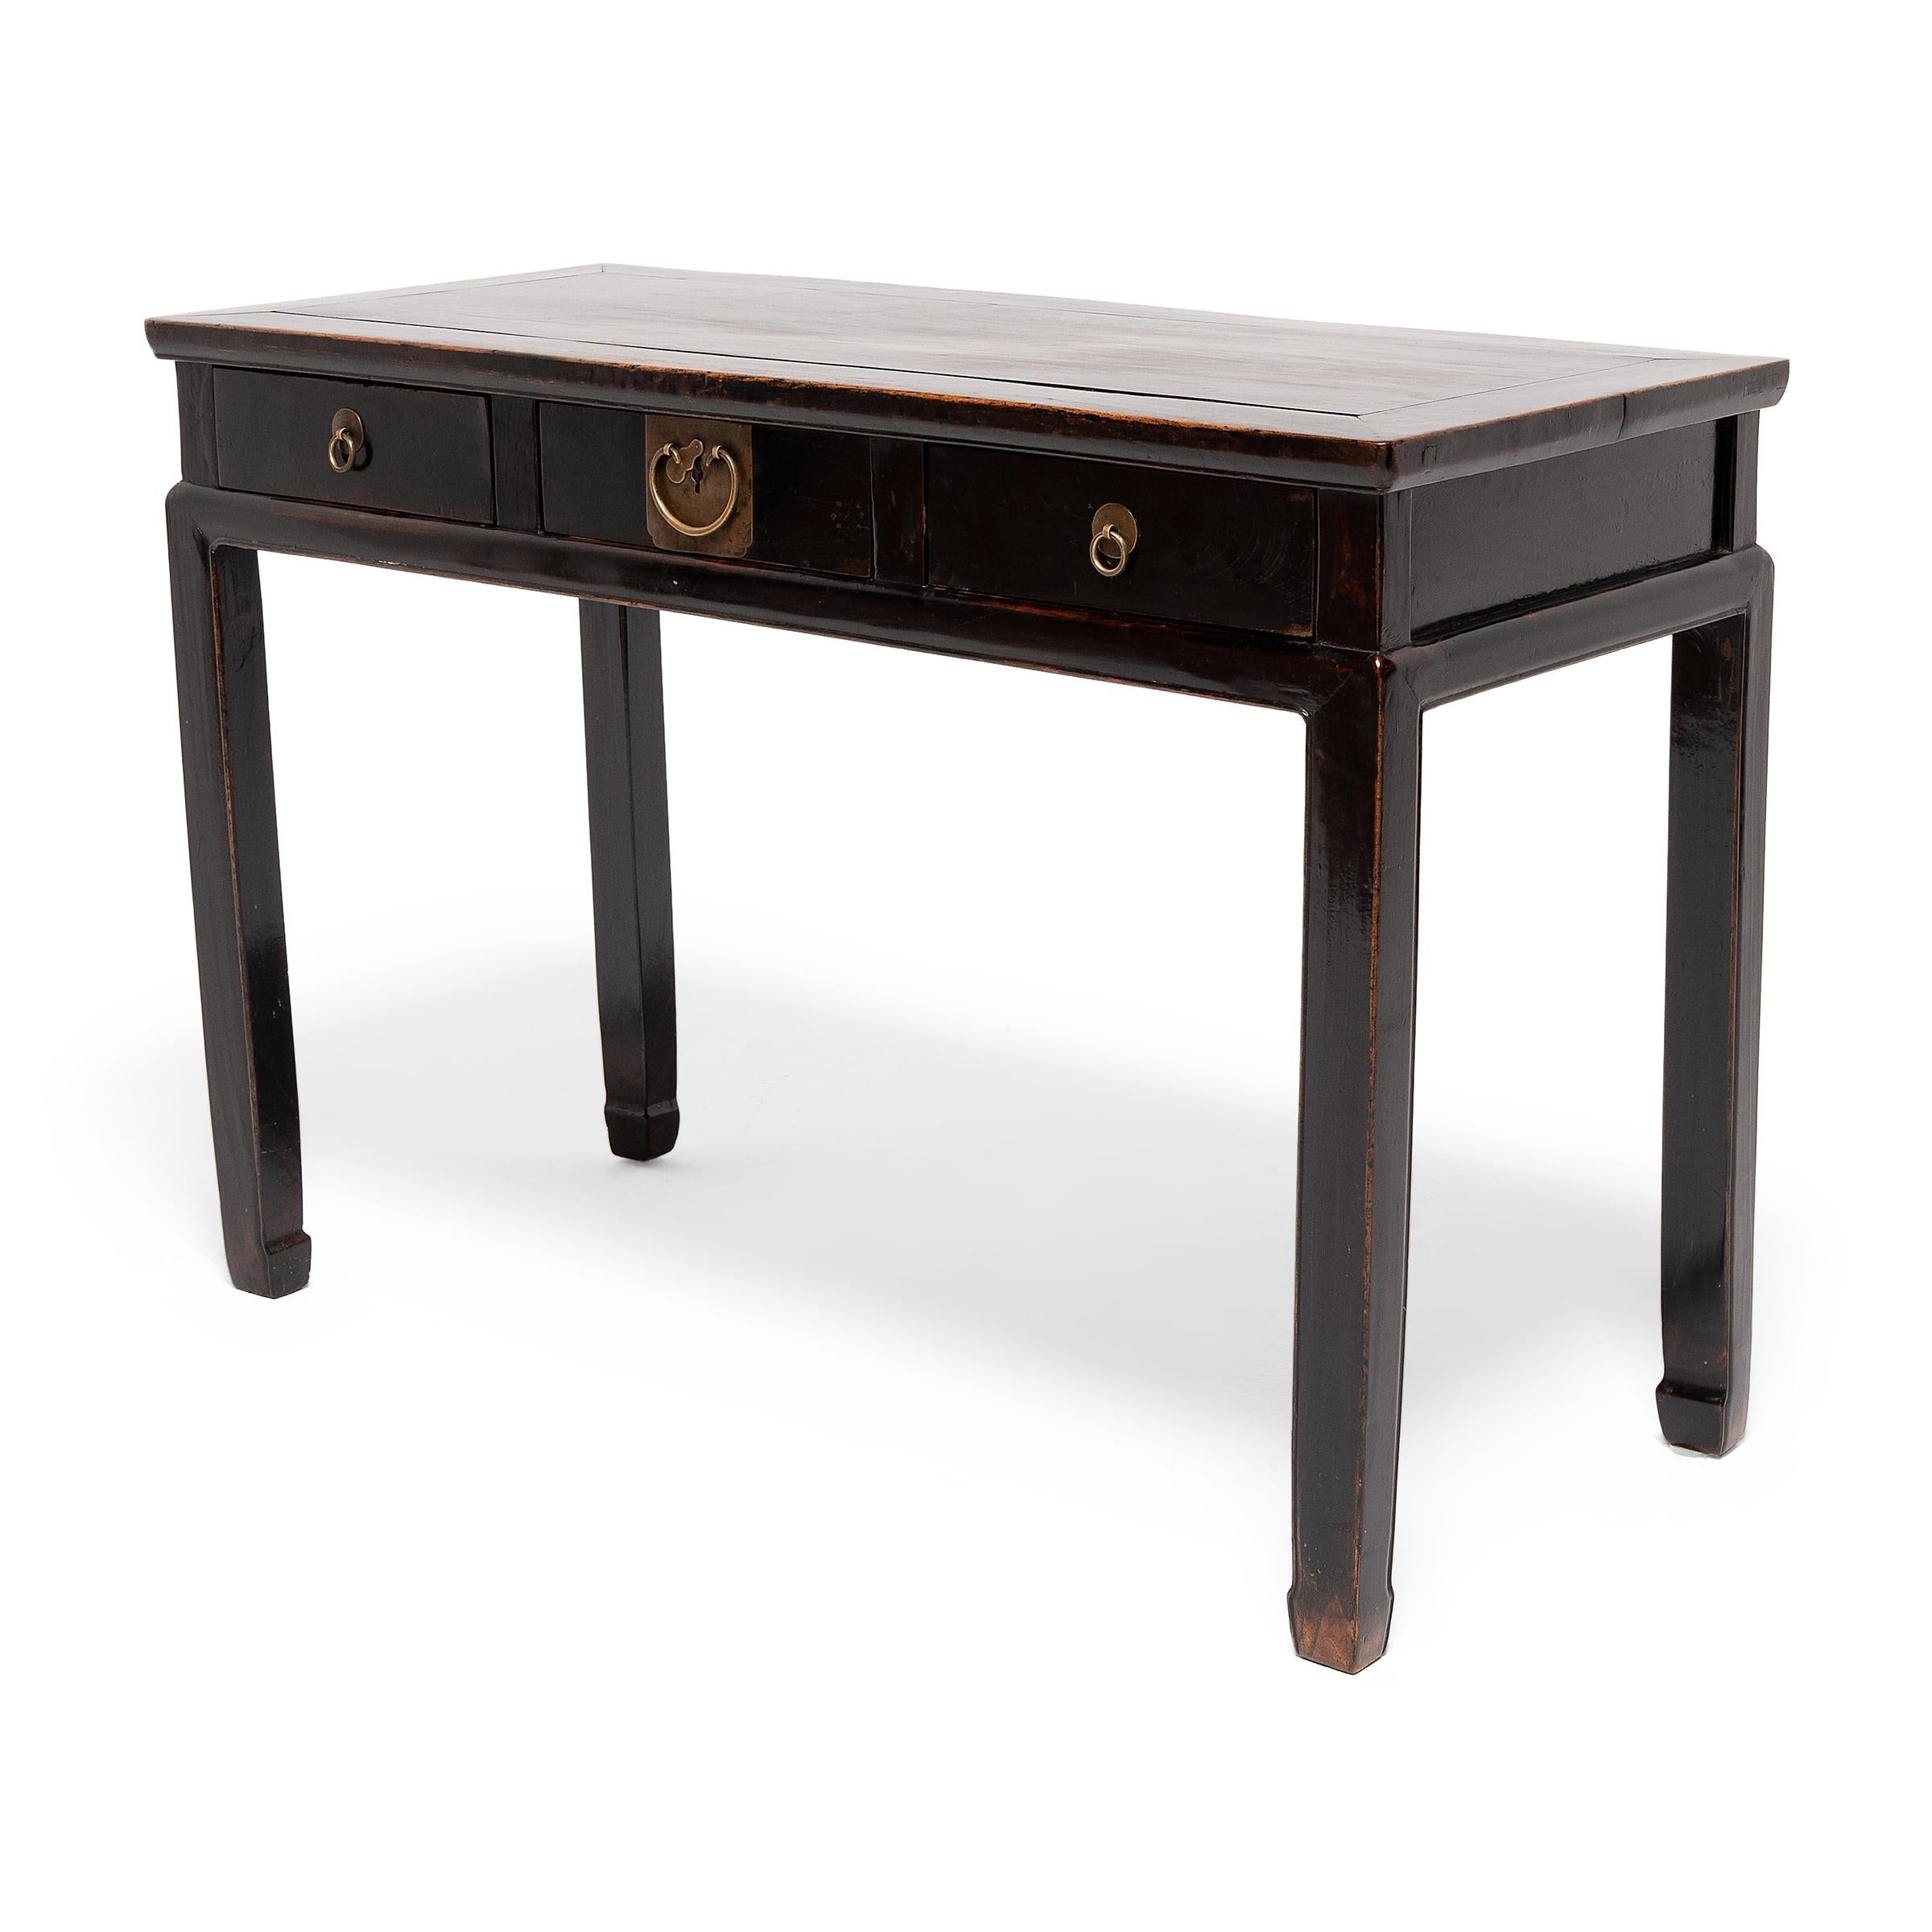 This three-drawer writing desk dates to the mid-19th century and once stood centerpiece in the office of a well-to-do professional of the late Qing-dynasty. Desks with drawers such as this were strongly influenced by Western designs, and didn't